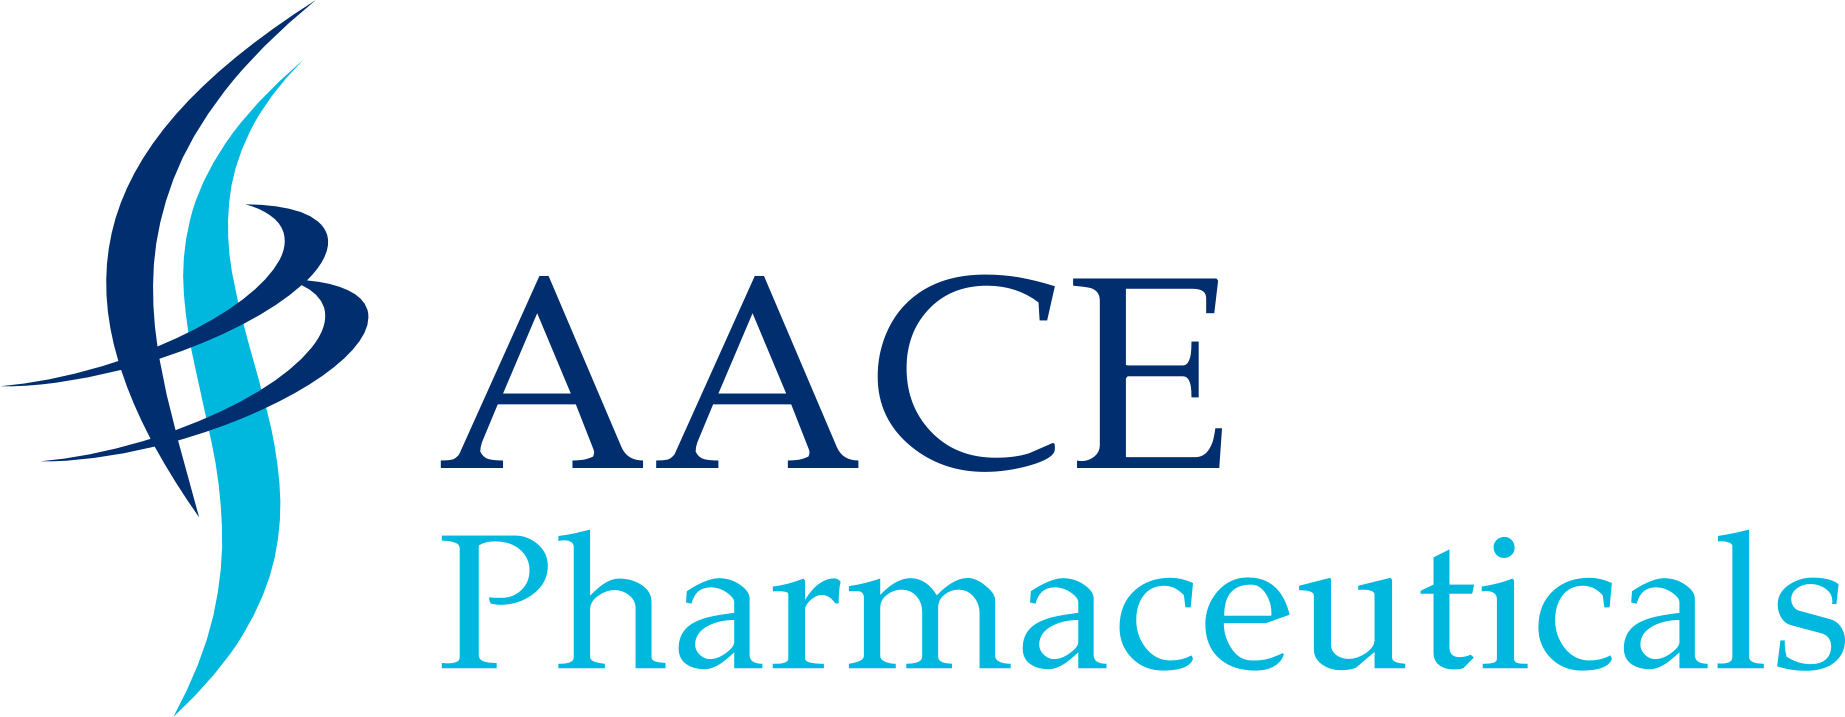 Welcome to AACE Pharma - Good Health Quality Of Life Is Our Mission